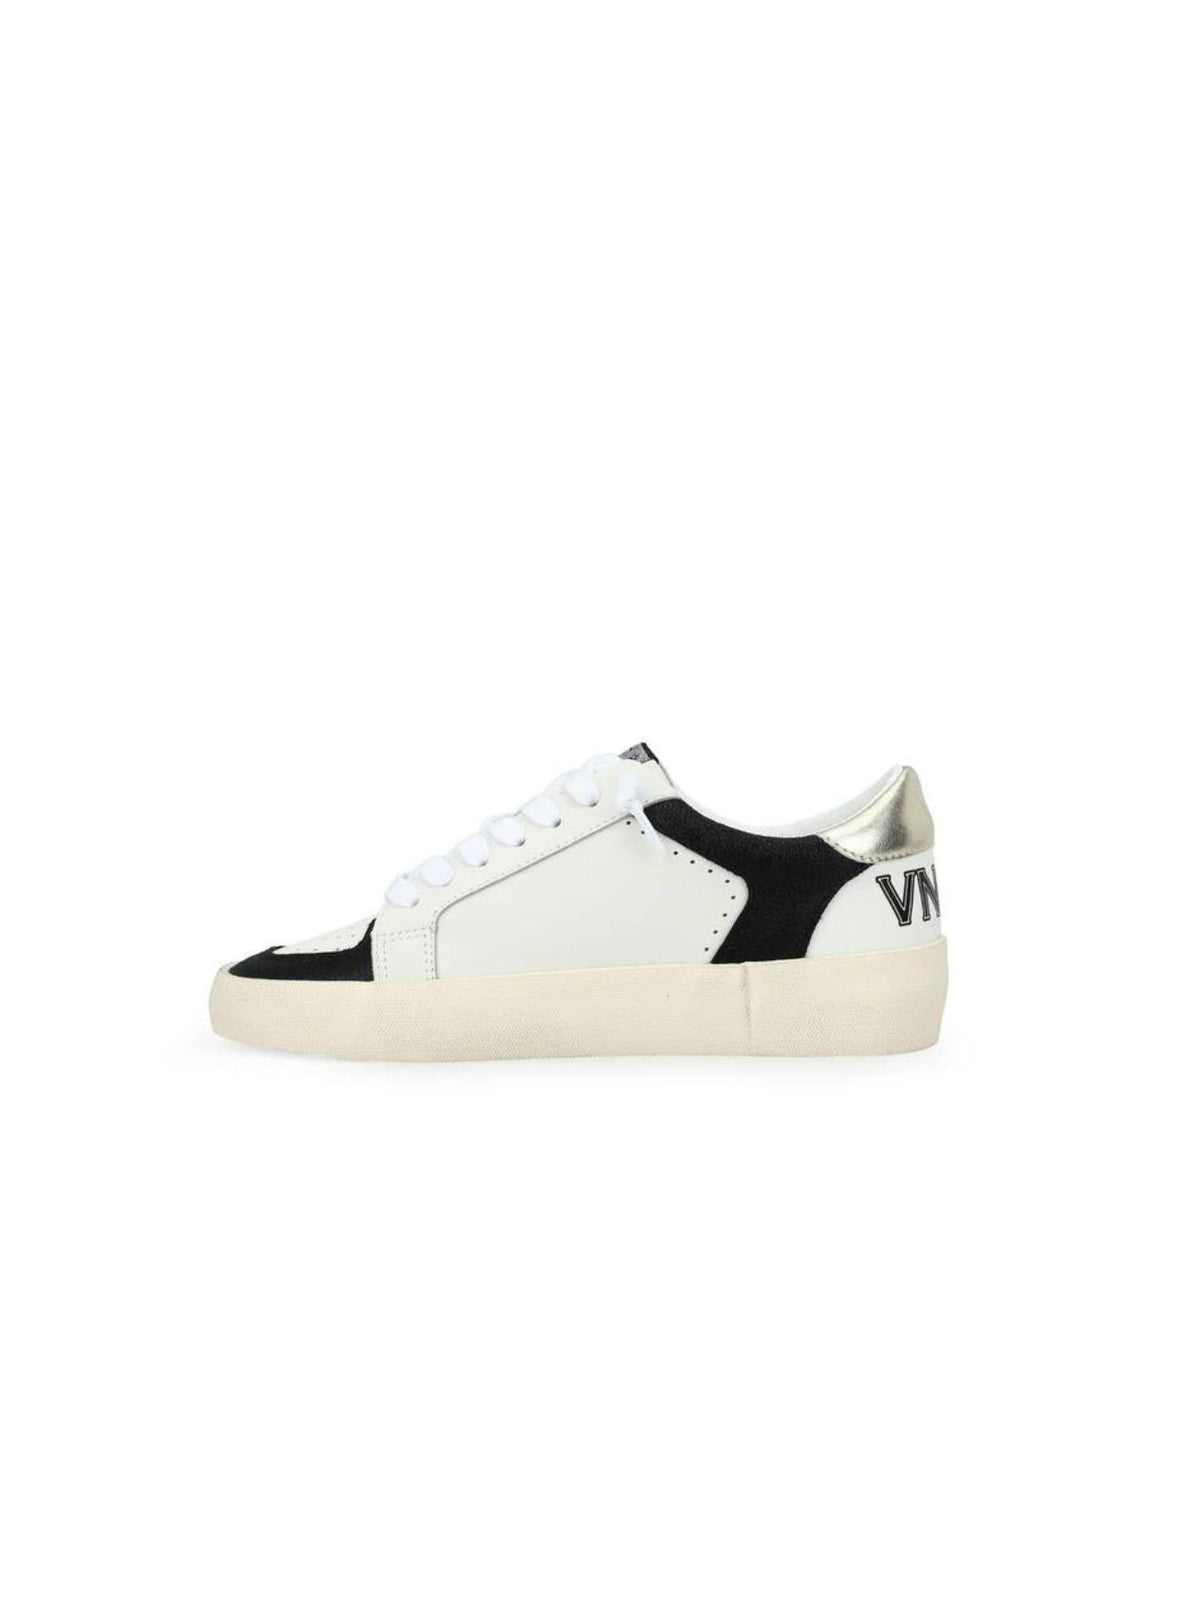 vintage havana reflex 24 colorblock mix star sneakers in black gold and white-side